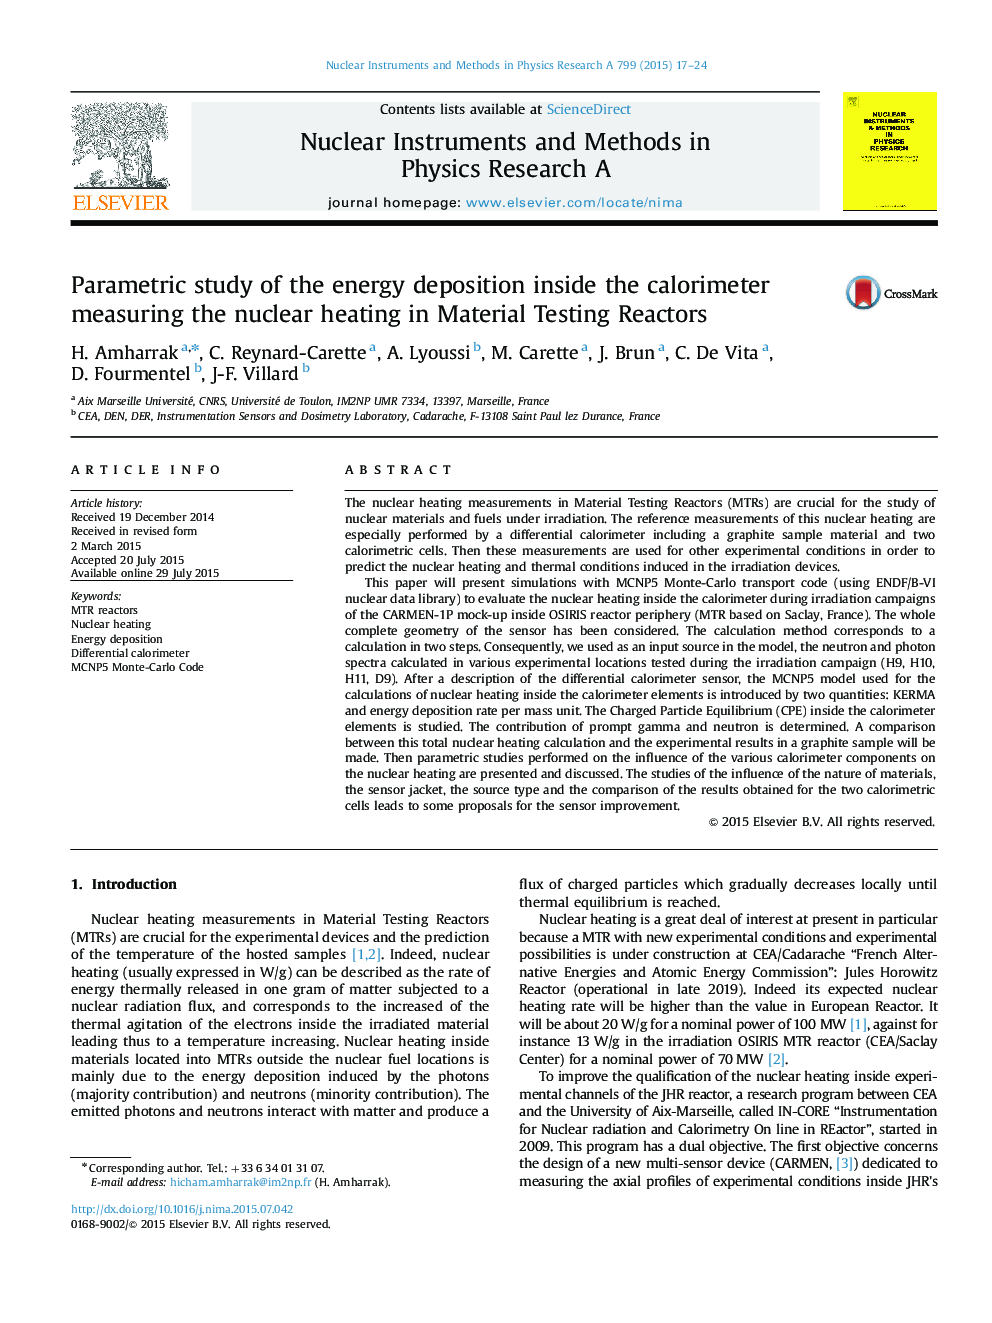 Parametric study of the energy deposition inside the calorimeter measuring the nuclear heating in Material Testing Reactors